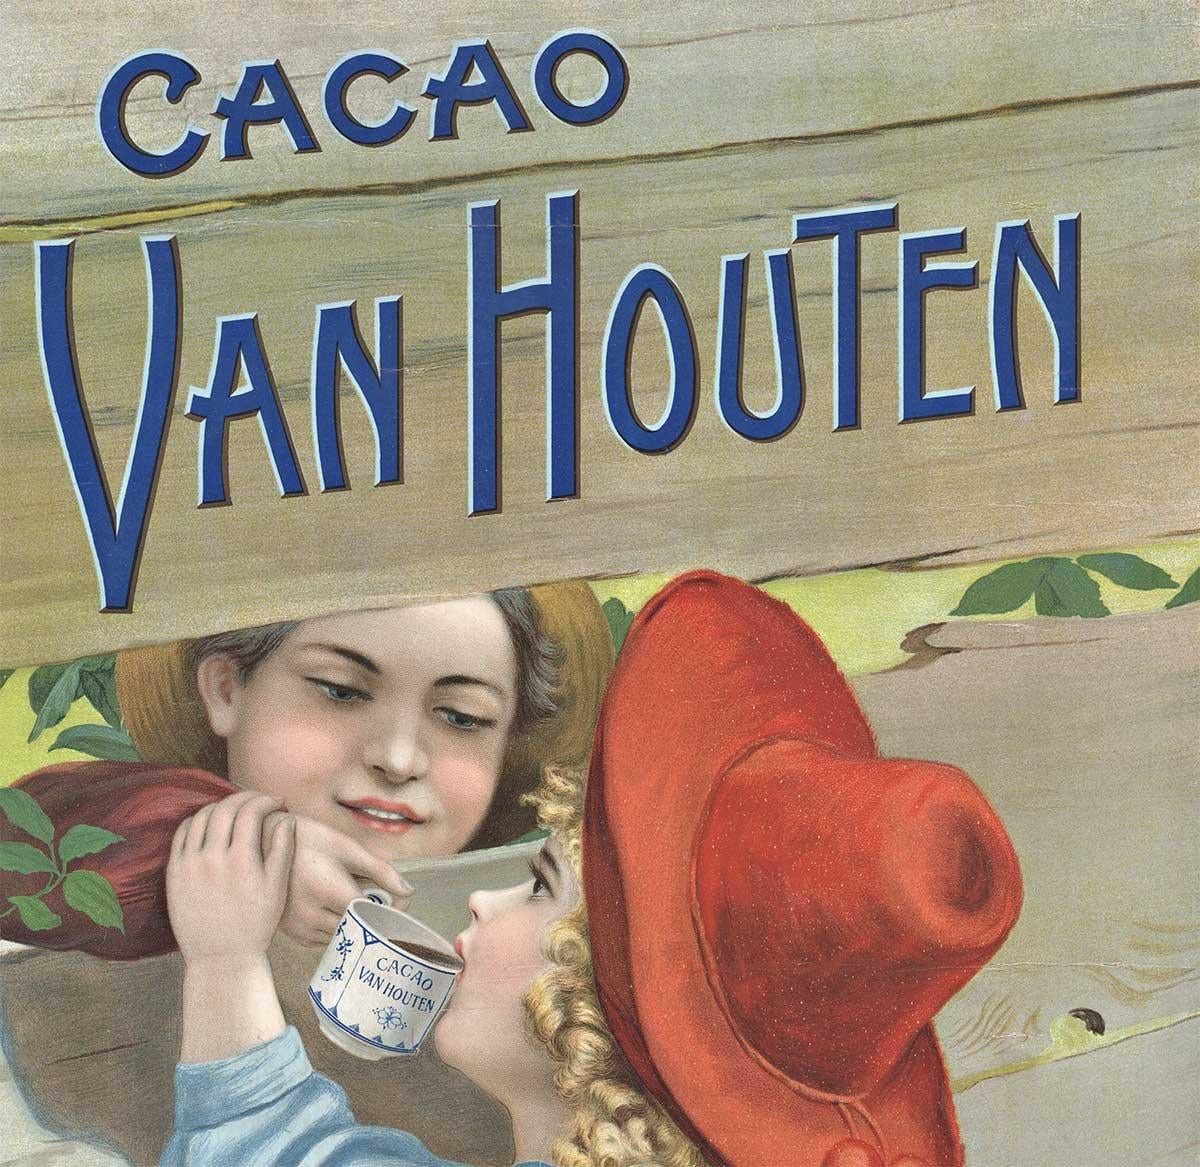 Cacao Van Houten original vintage French chocolate chromo-lithograph poster - Print by Unknown